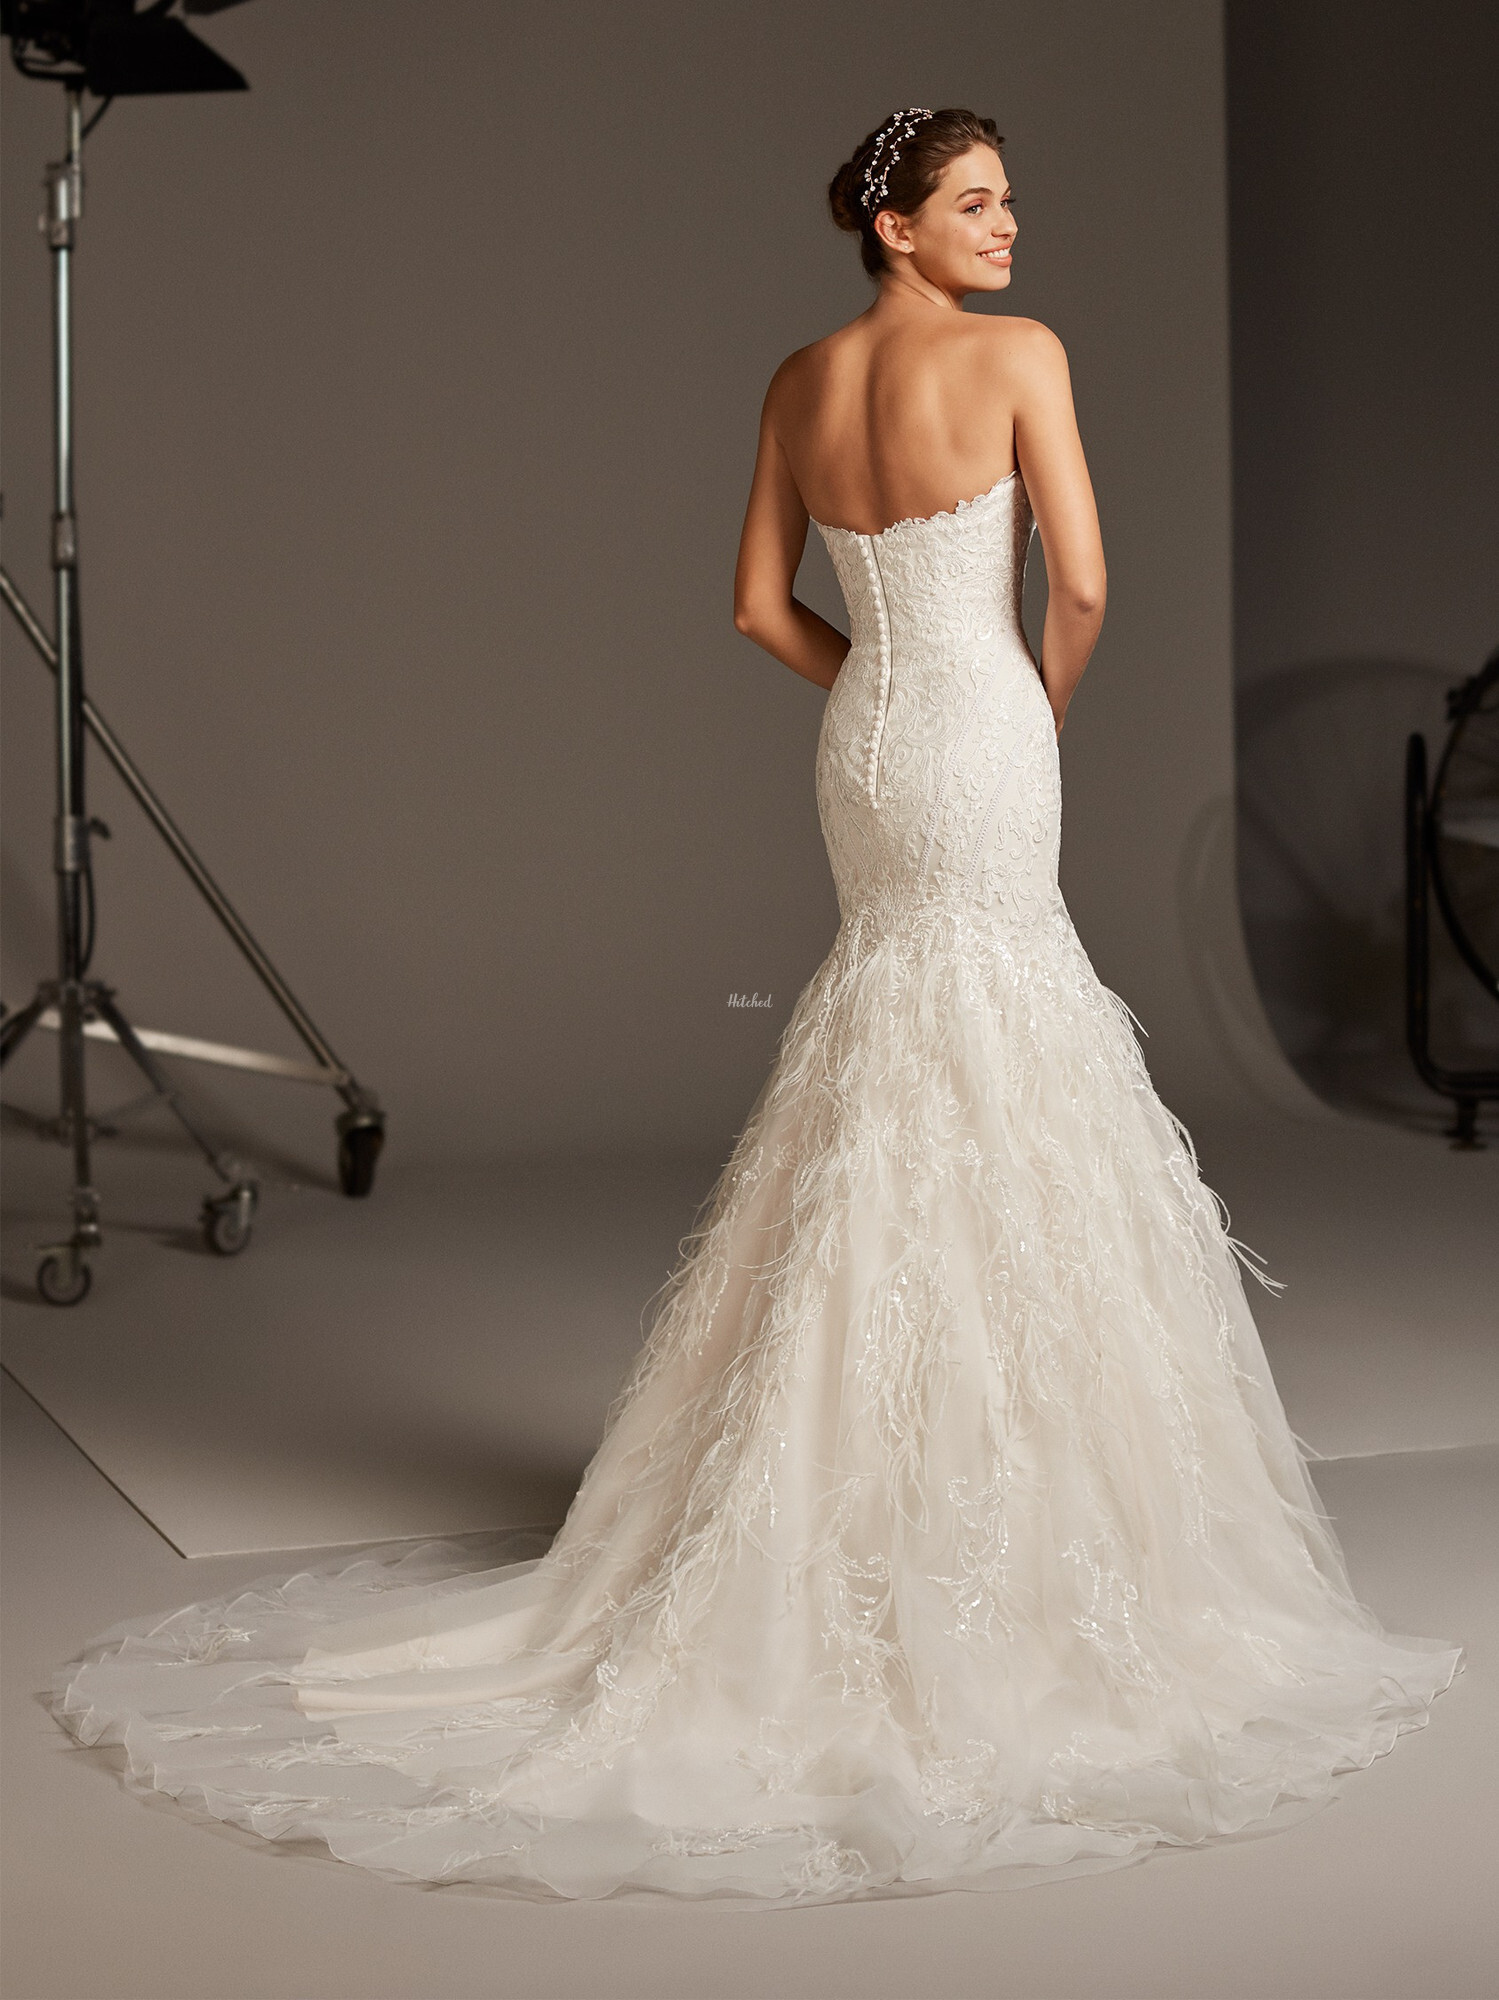 ARIES Wedding Dress from Pronovias - hitched.co.uk